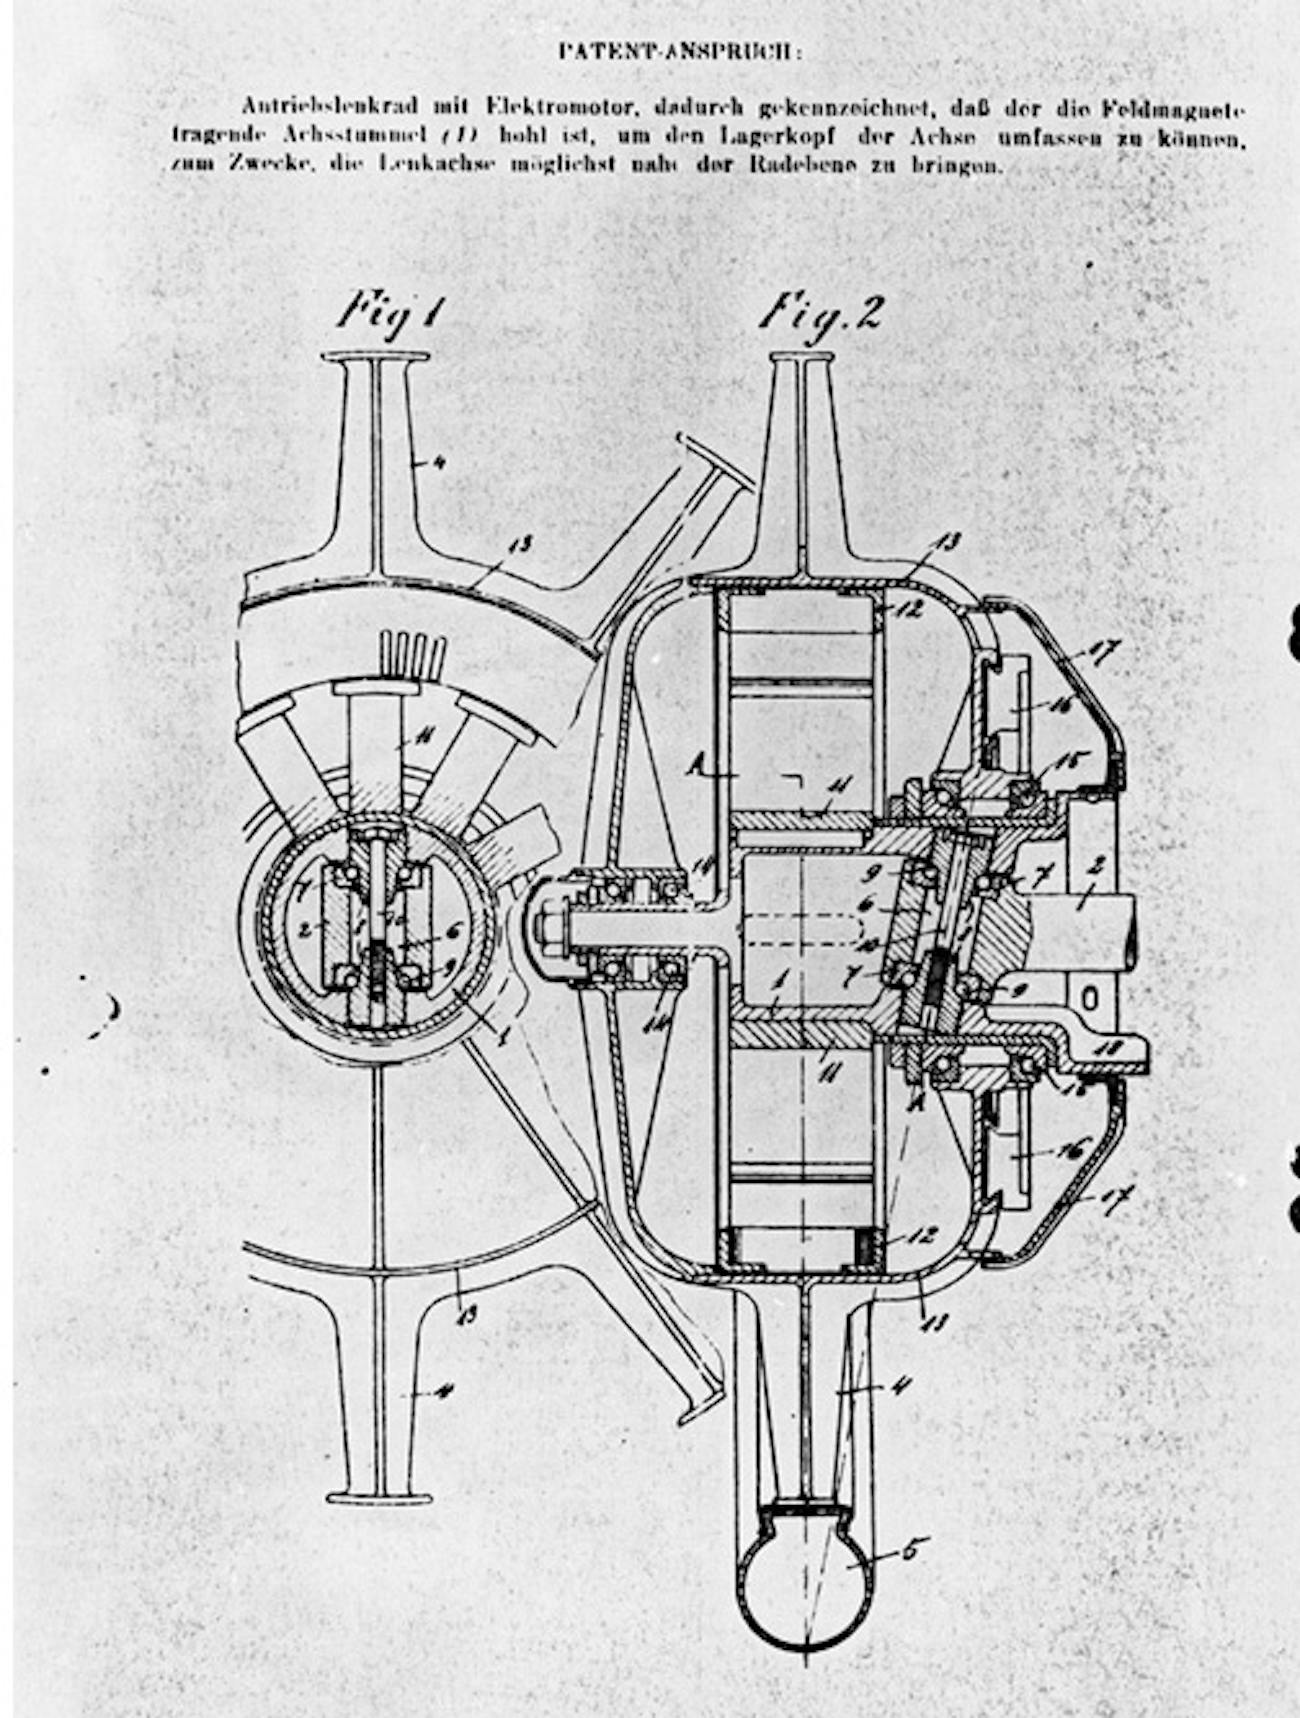 Diagram of electric motor by Ferdinand Porsche, early 20th Century